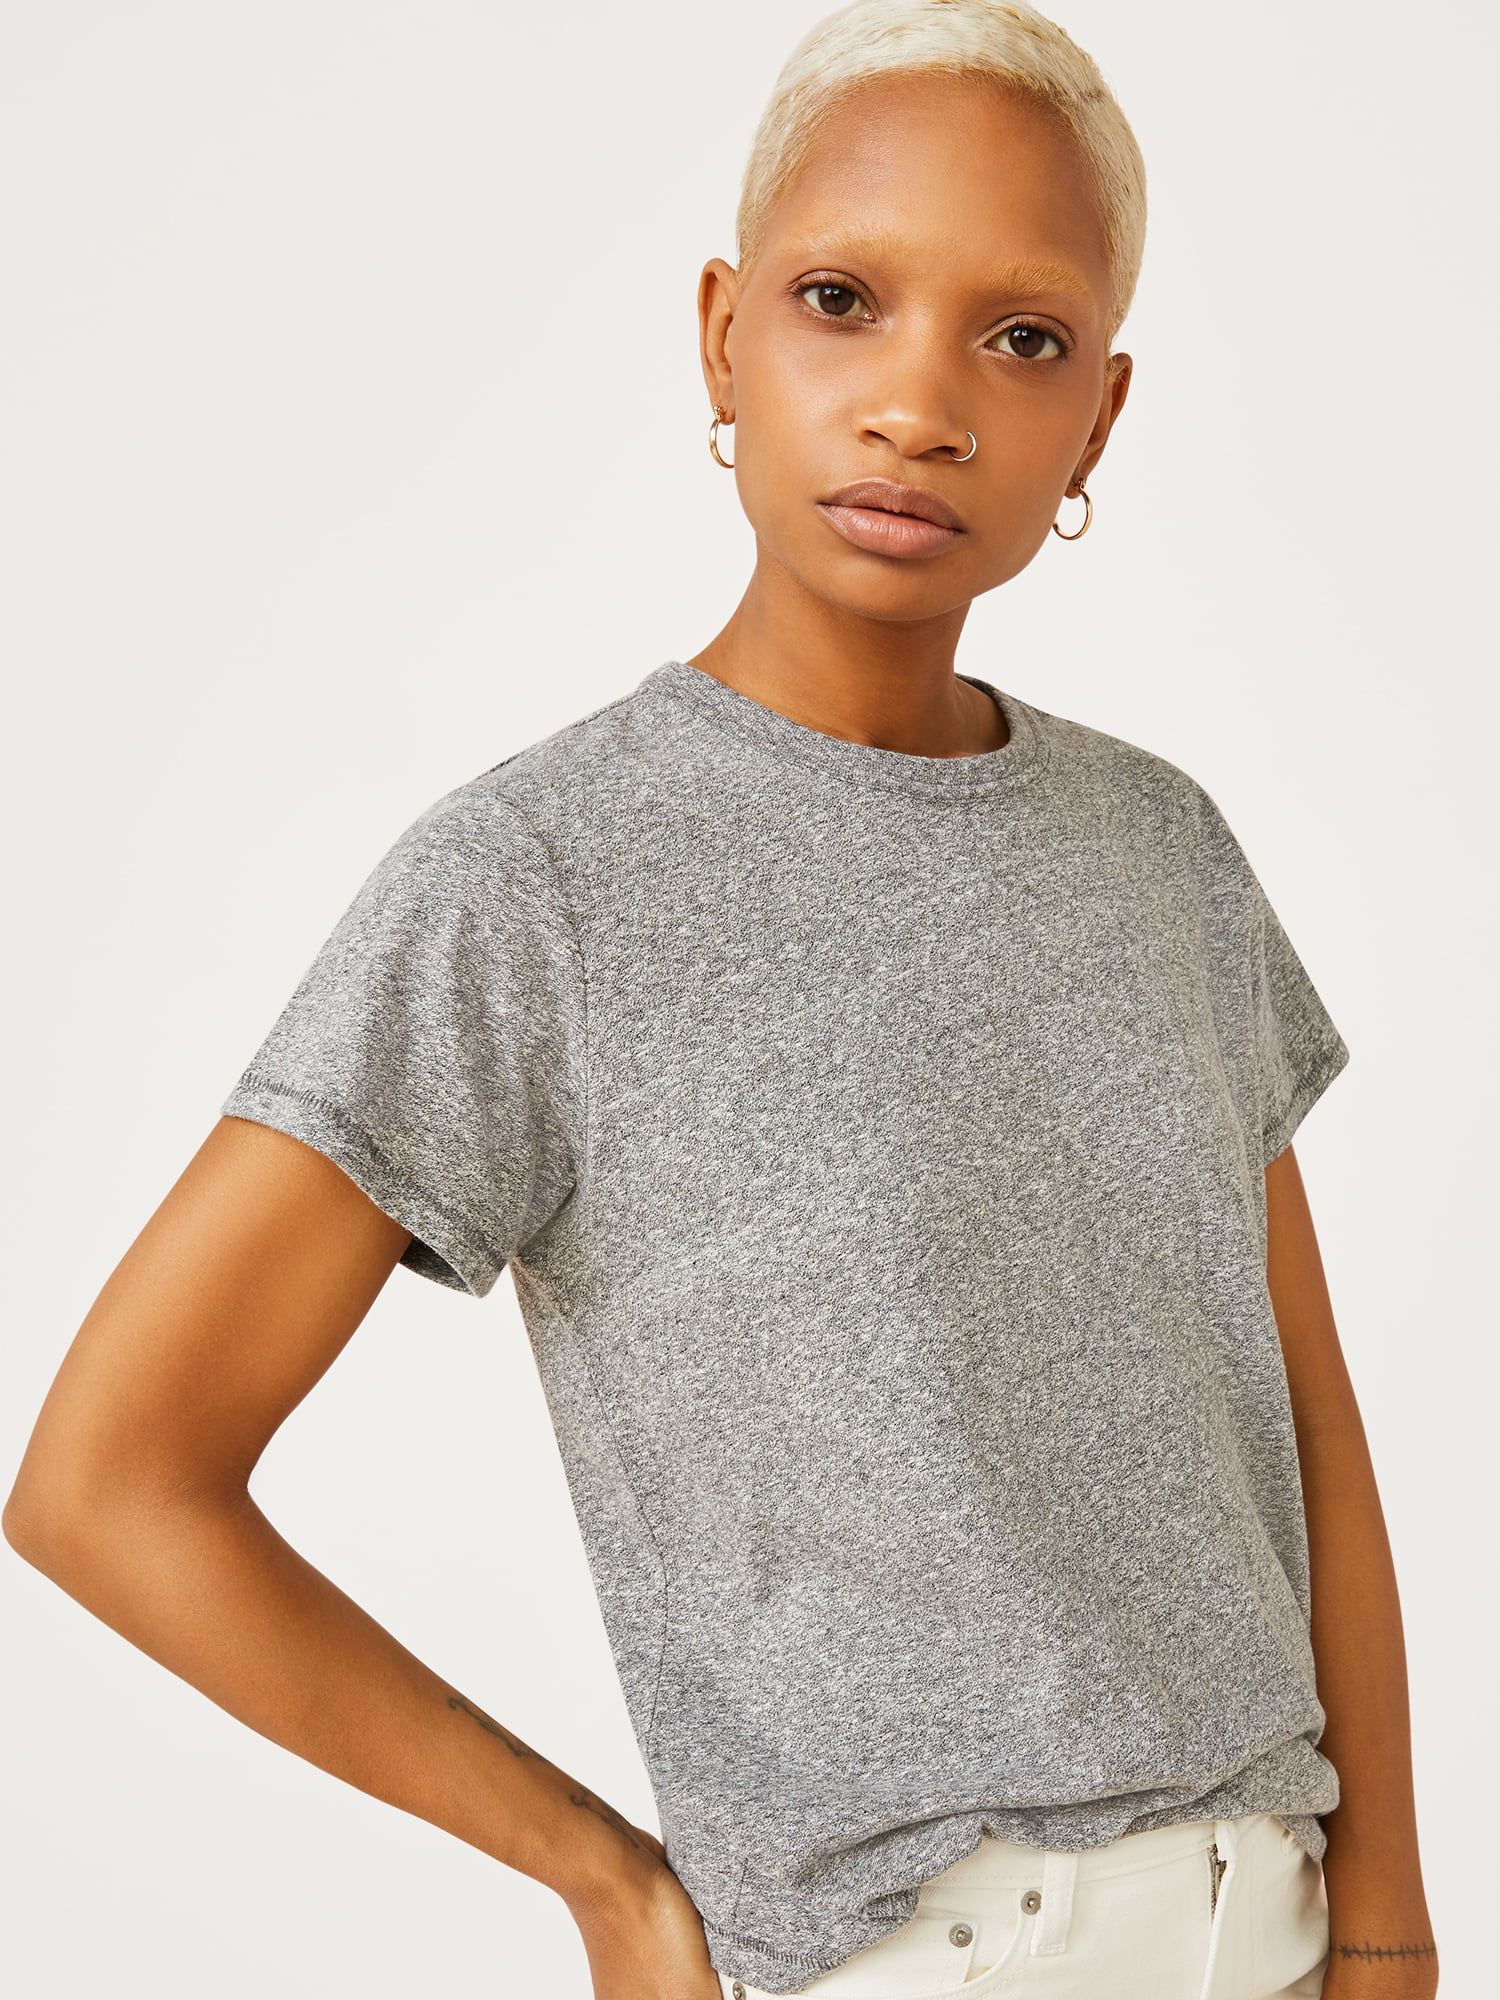 Free Assembly Women's Ringer Tee with Short Sleeves, Sizes XS-XXXL | Walmart (US)